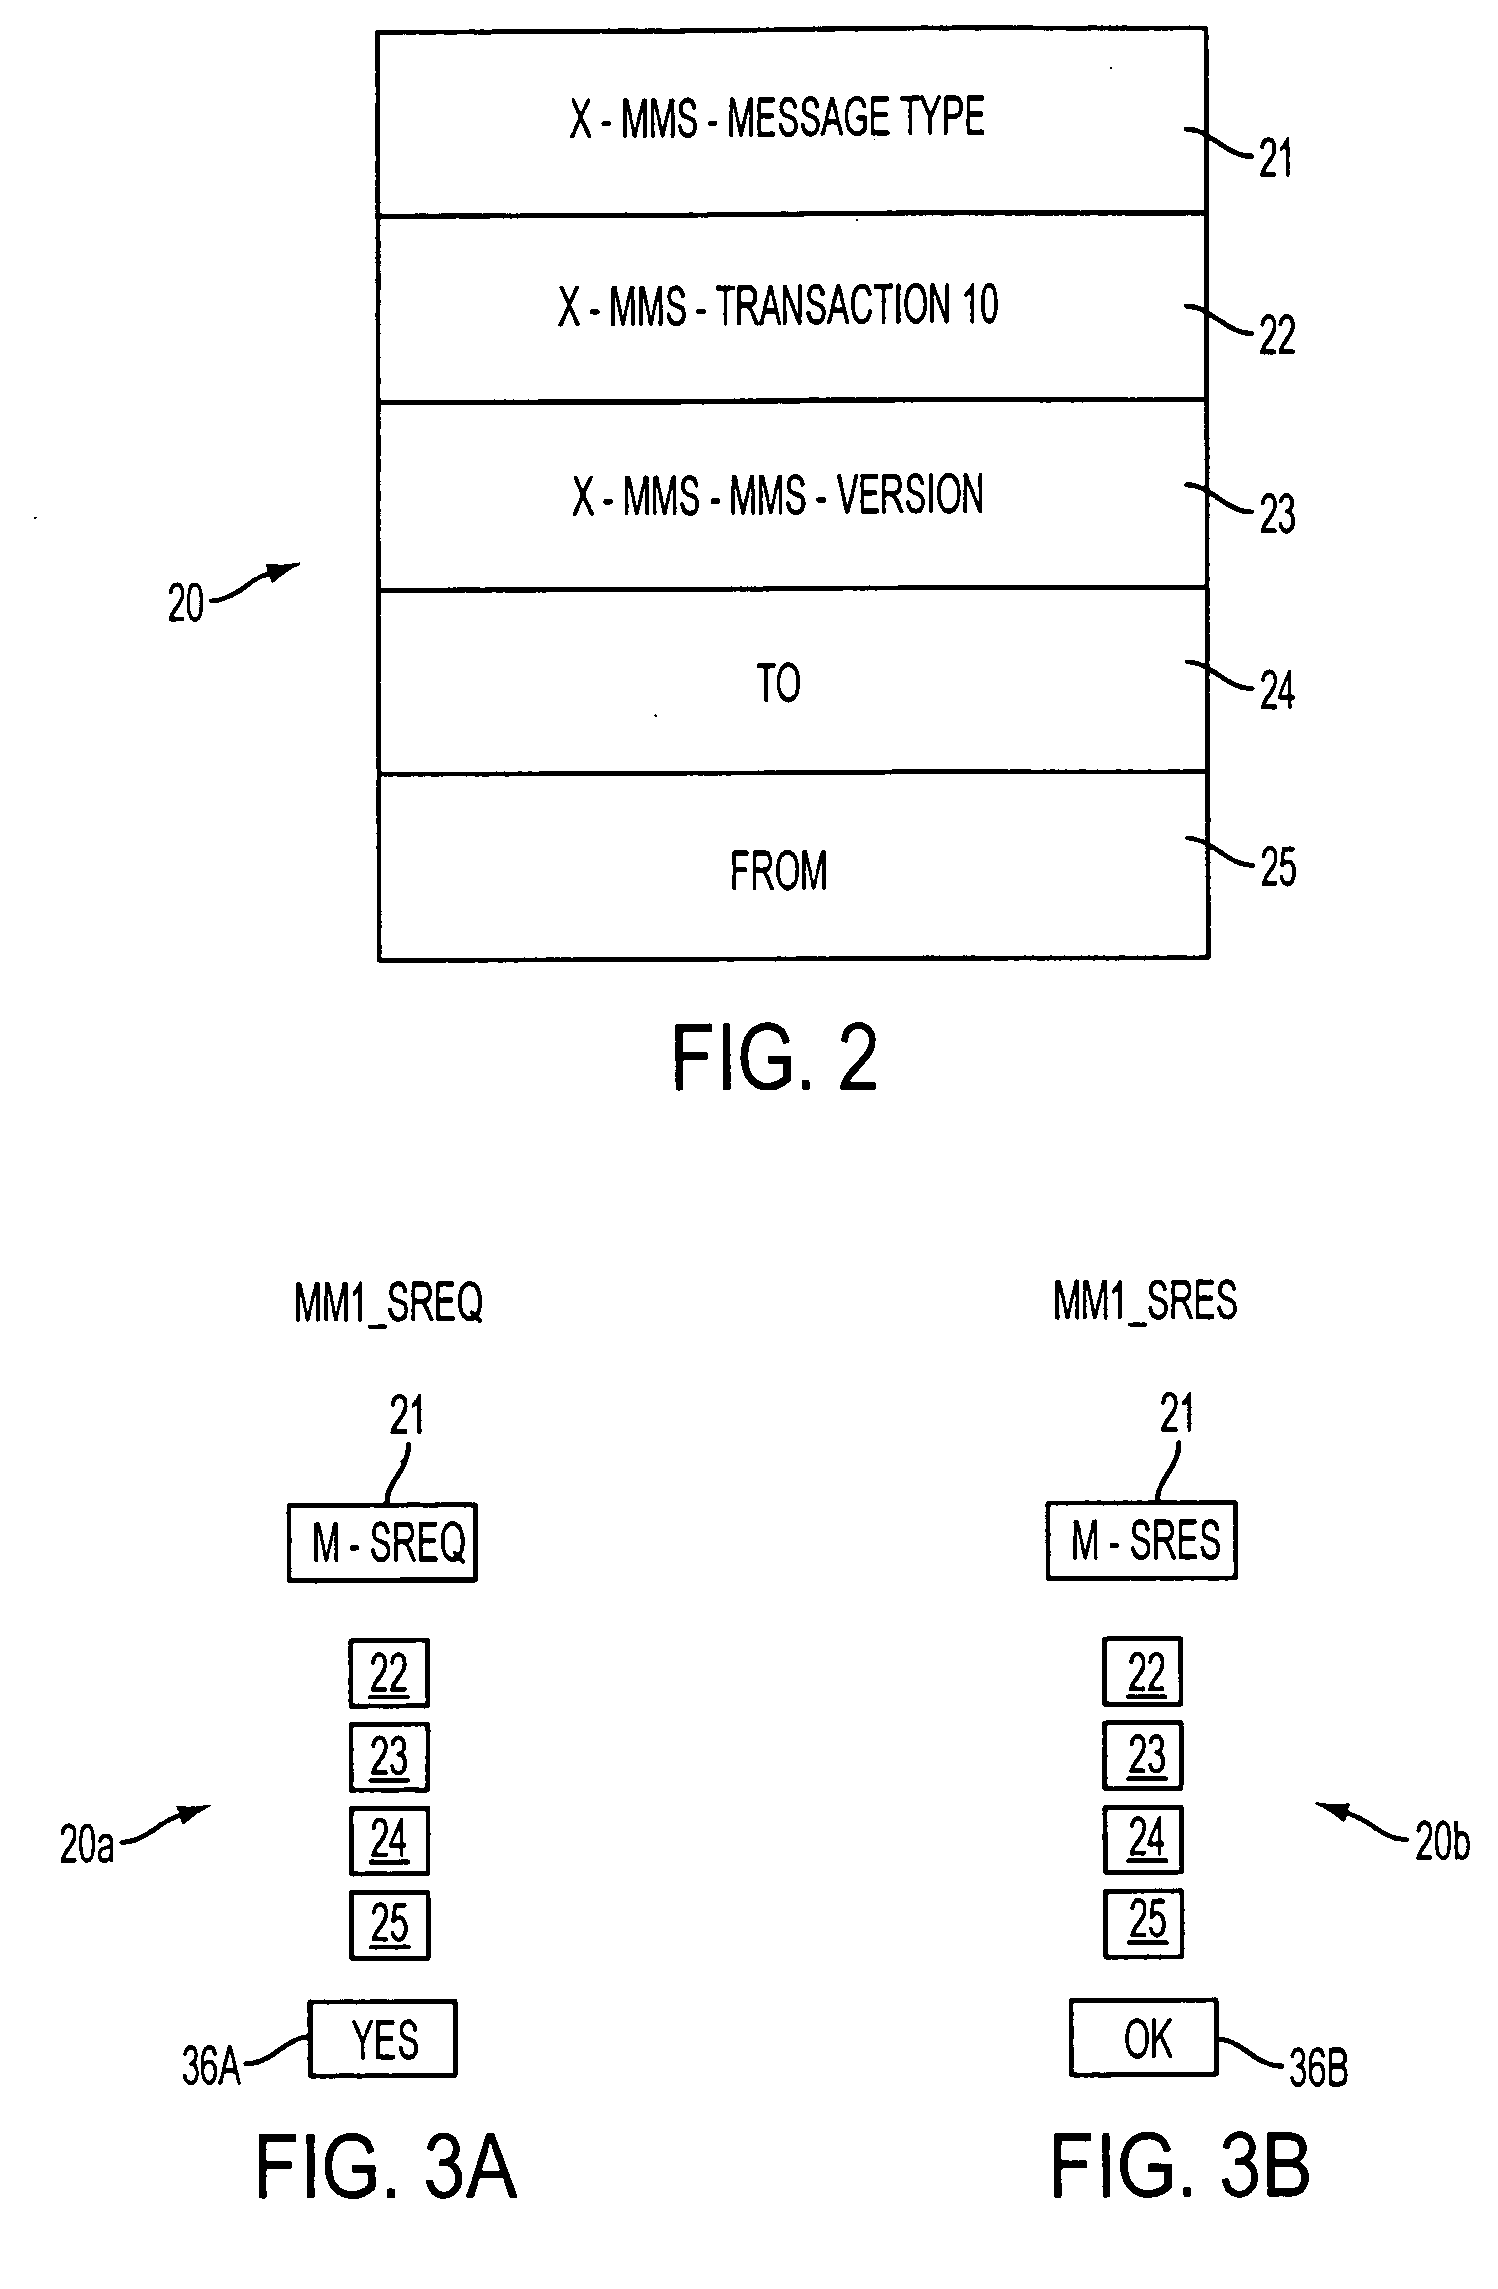 Method for Retrieving and Delivering Multimedia Messages Using the Session Initiation Protocol